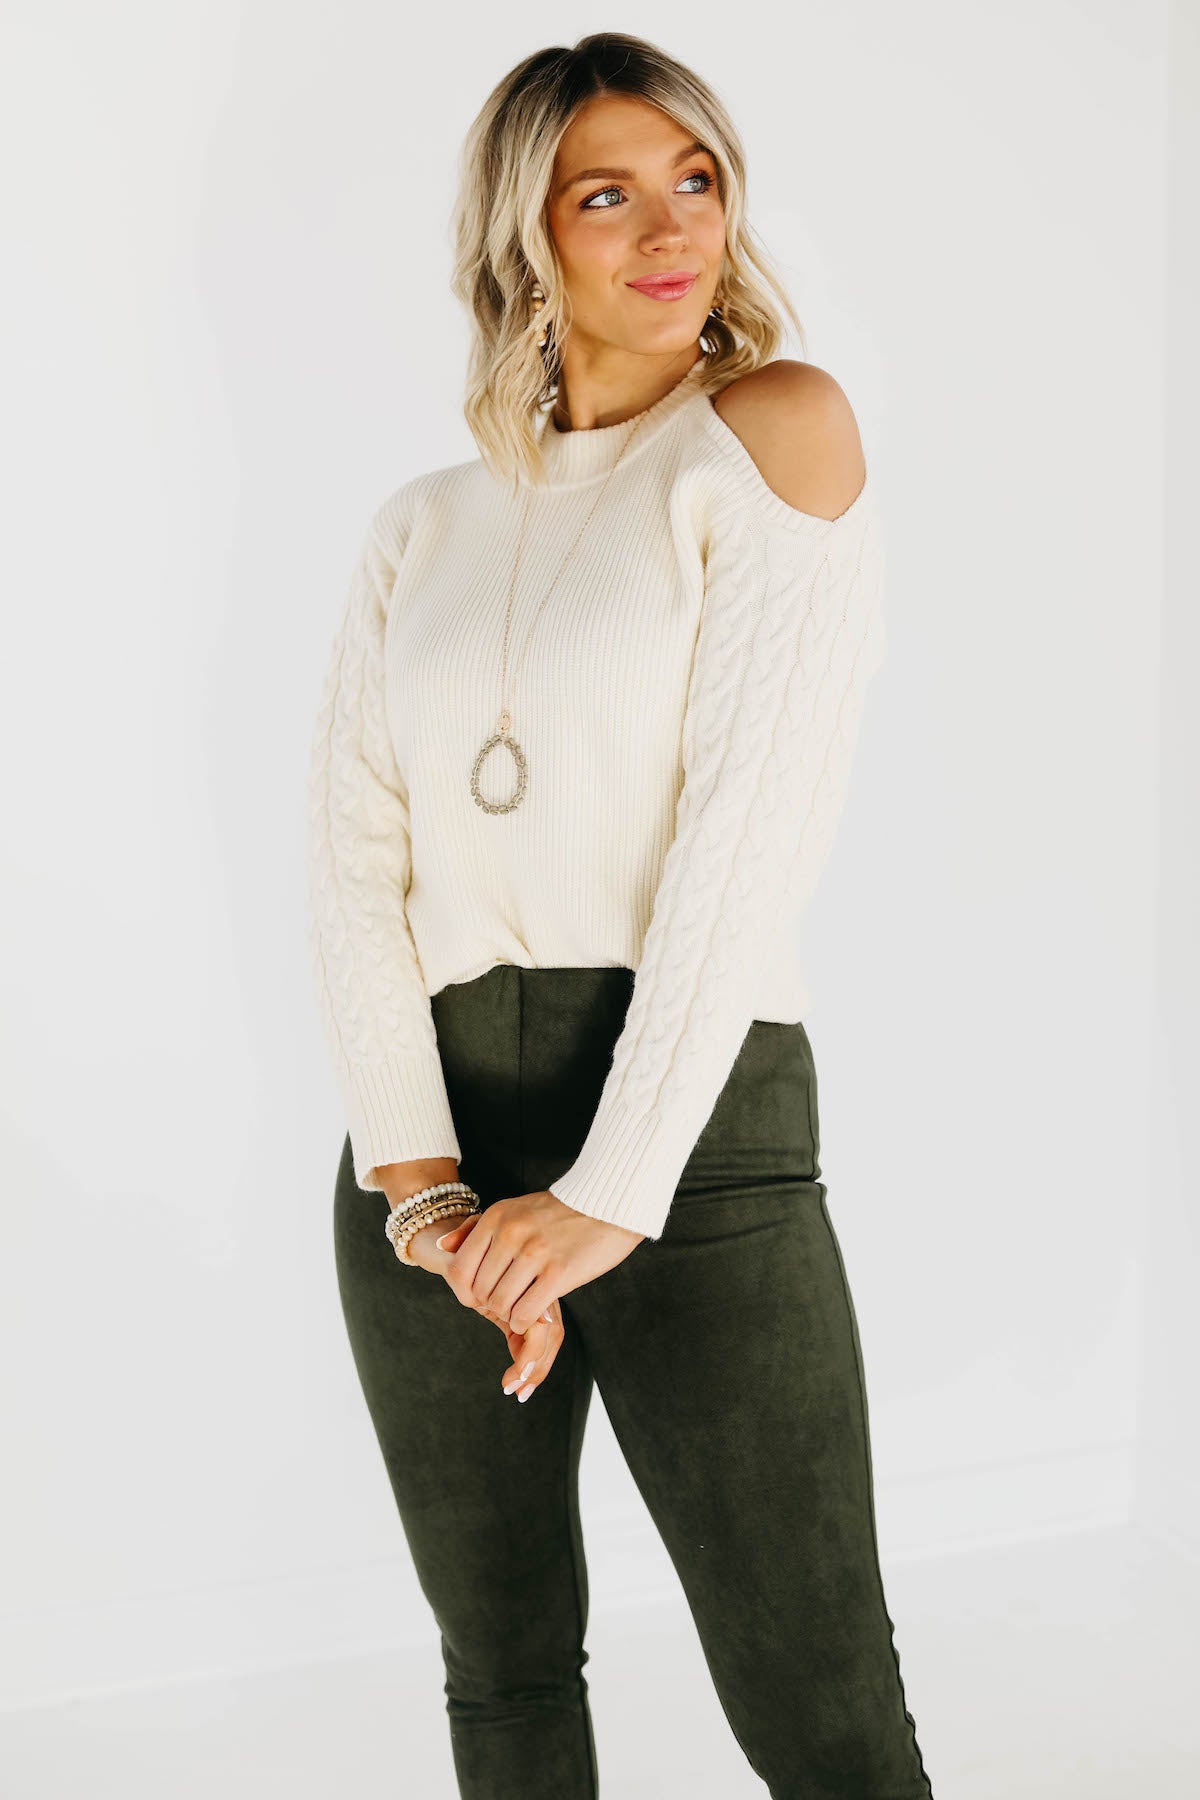 The Thorne Cold Shoulder Sweater - FINAL SALE